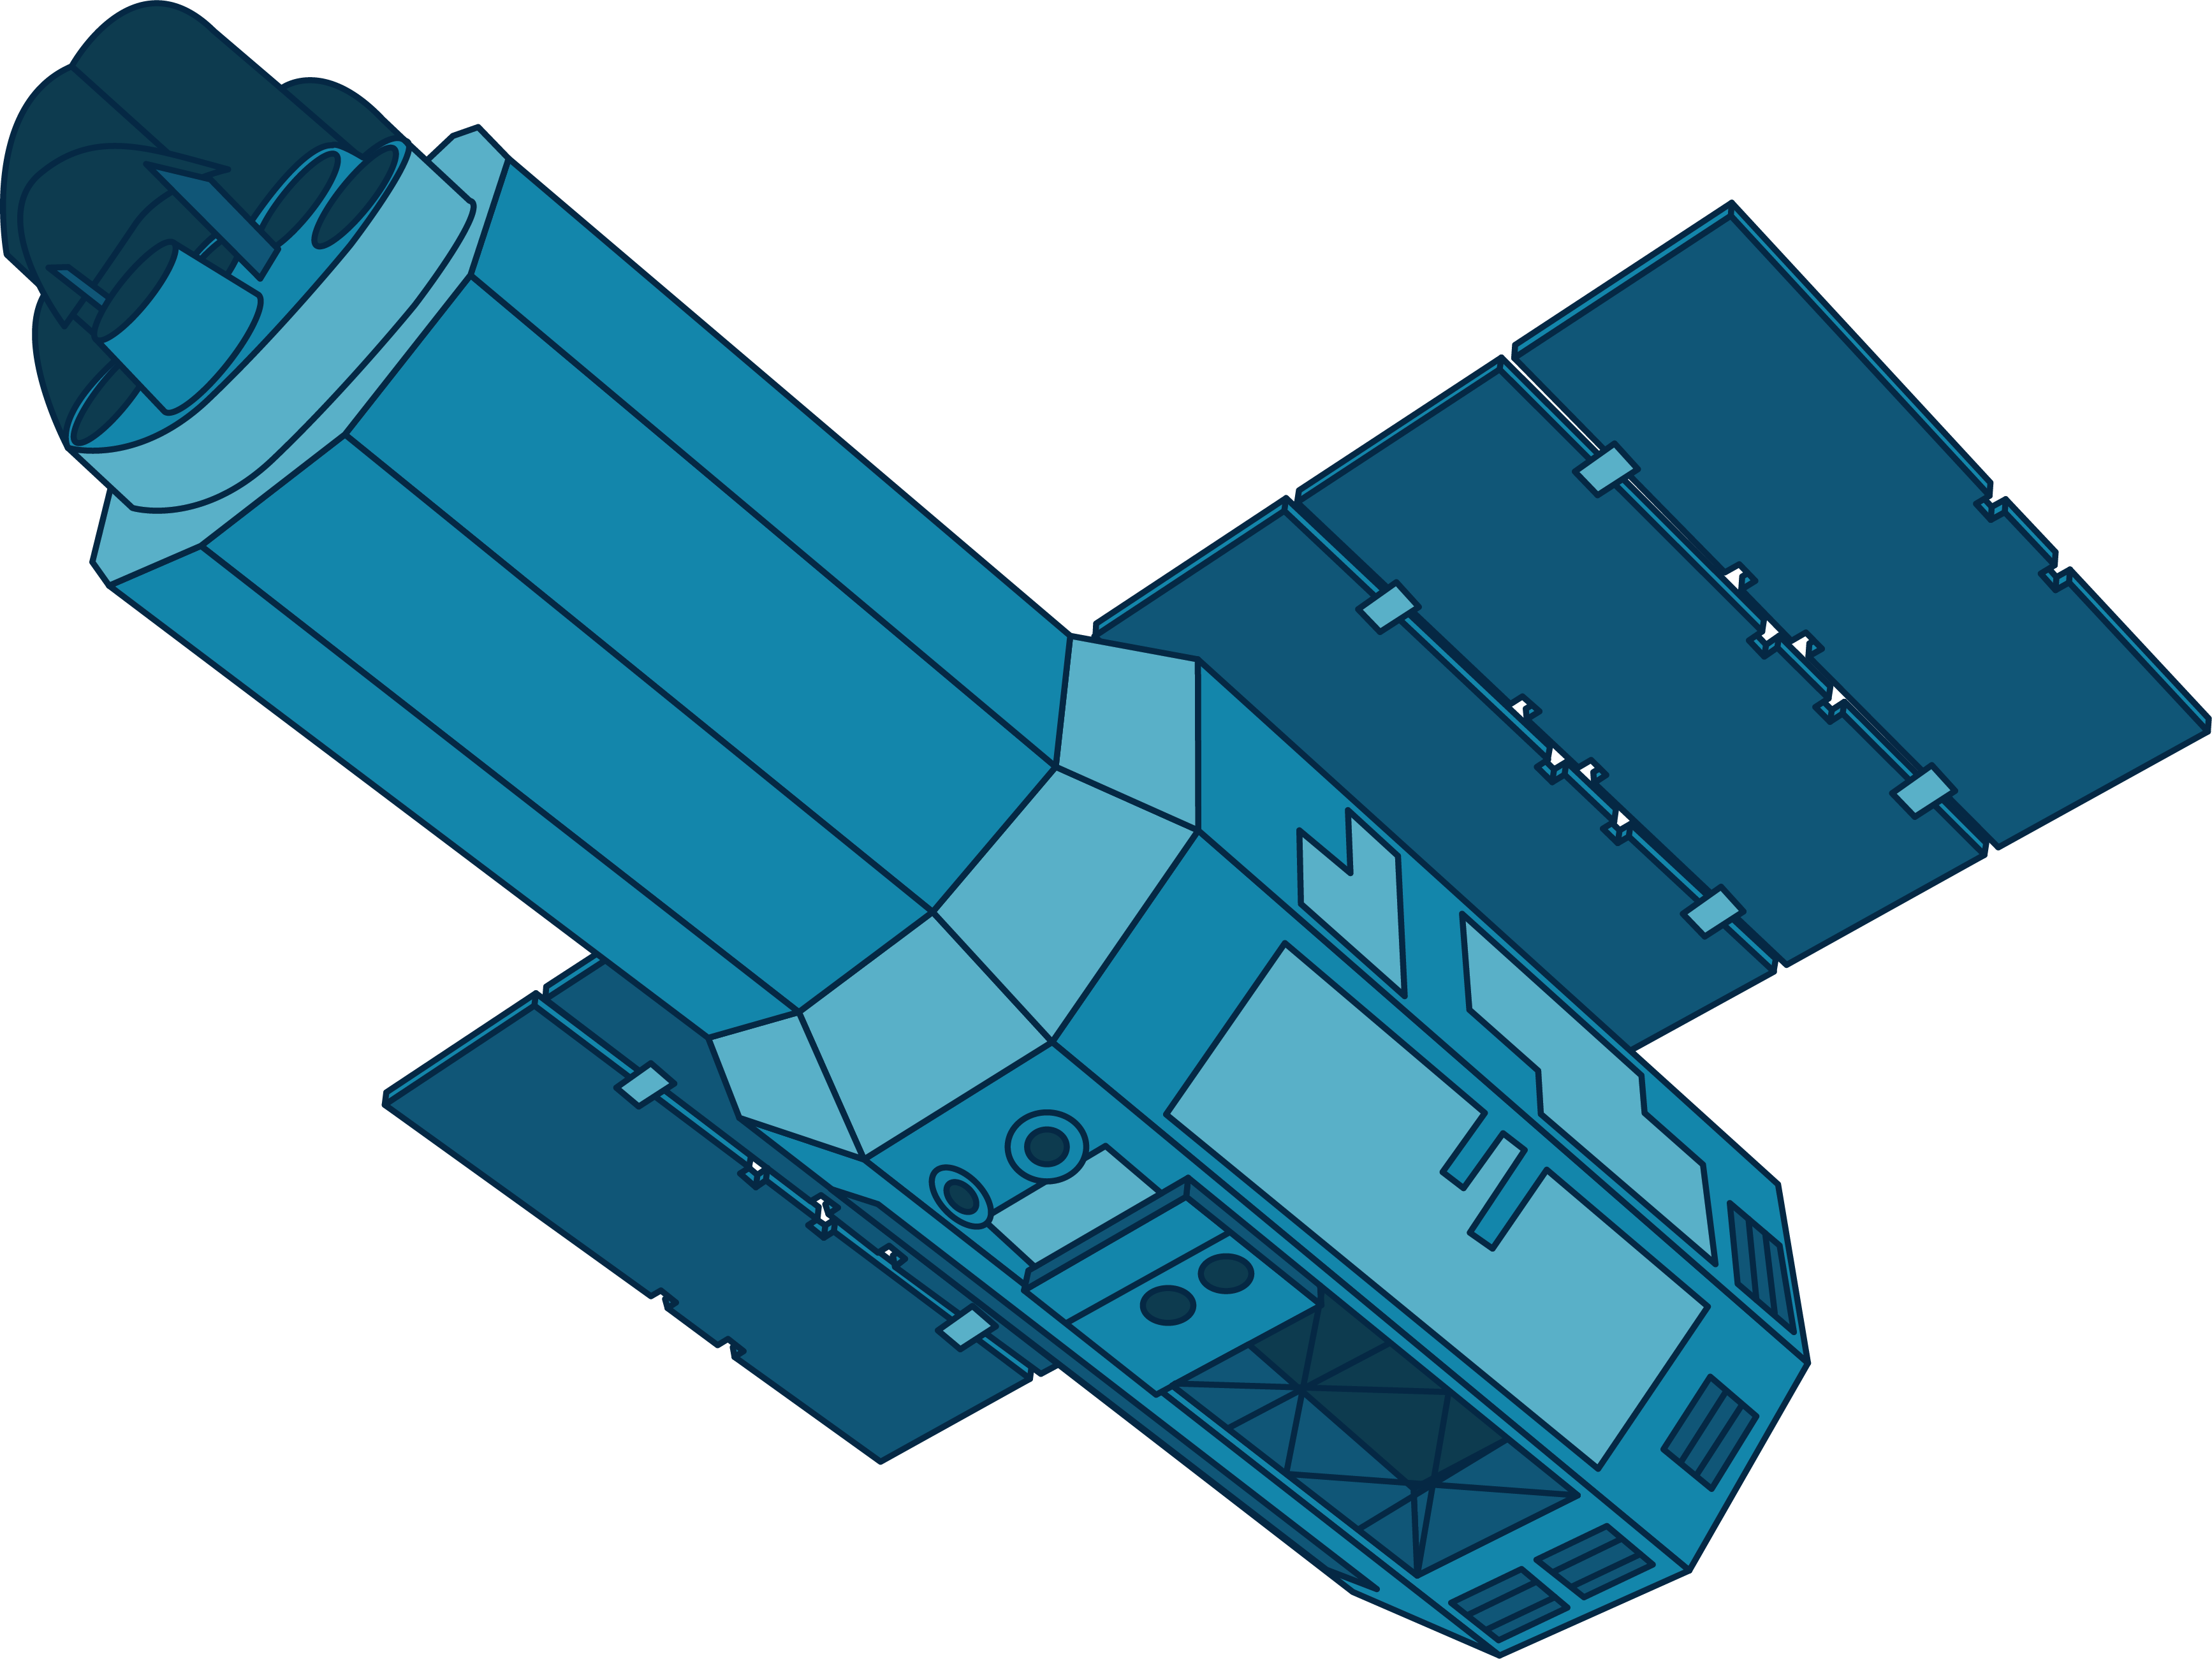 This illustration shows the Suzaku spacecraft in shades of blue. The long body of the spacecraft is narrower at the top than at the bottom, which has a hollow area underneath. Solar panels extend to either side of the widest part of the body. Round circles representing the telescopes extend from the top of the narrowest part of the body.